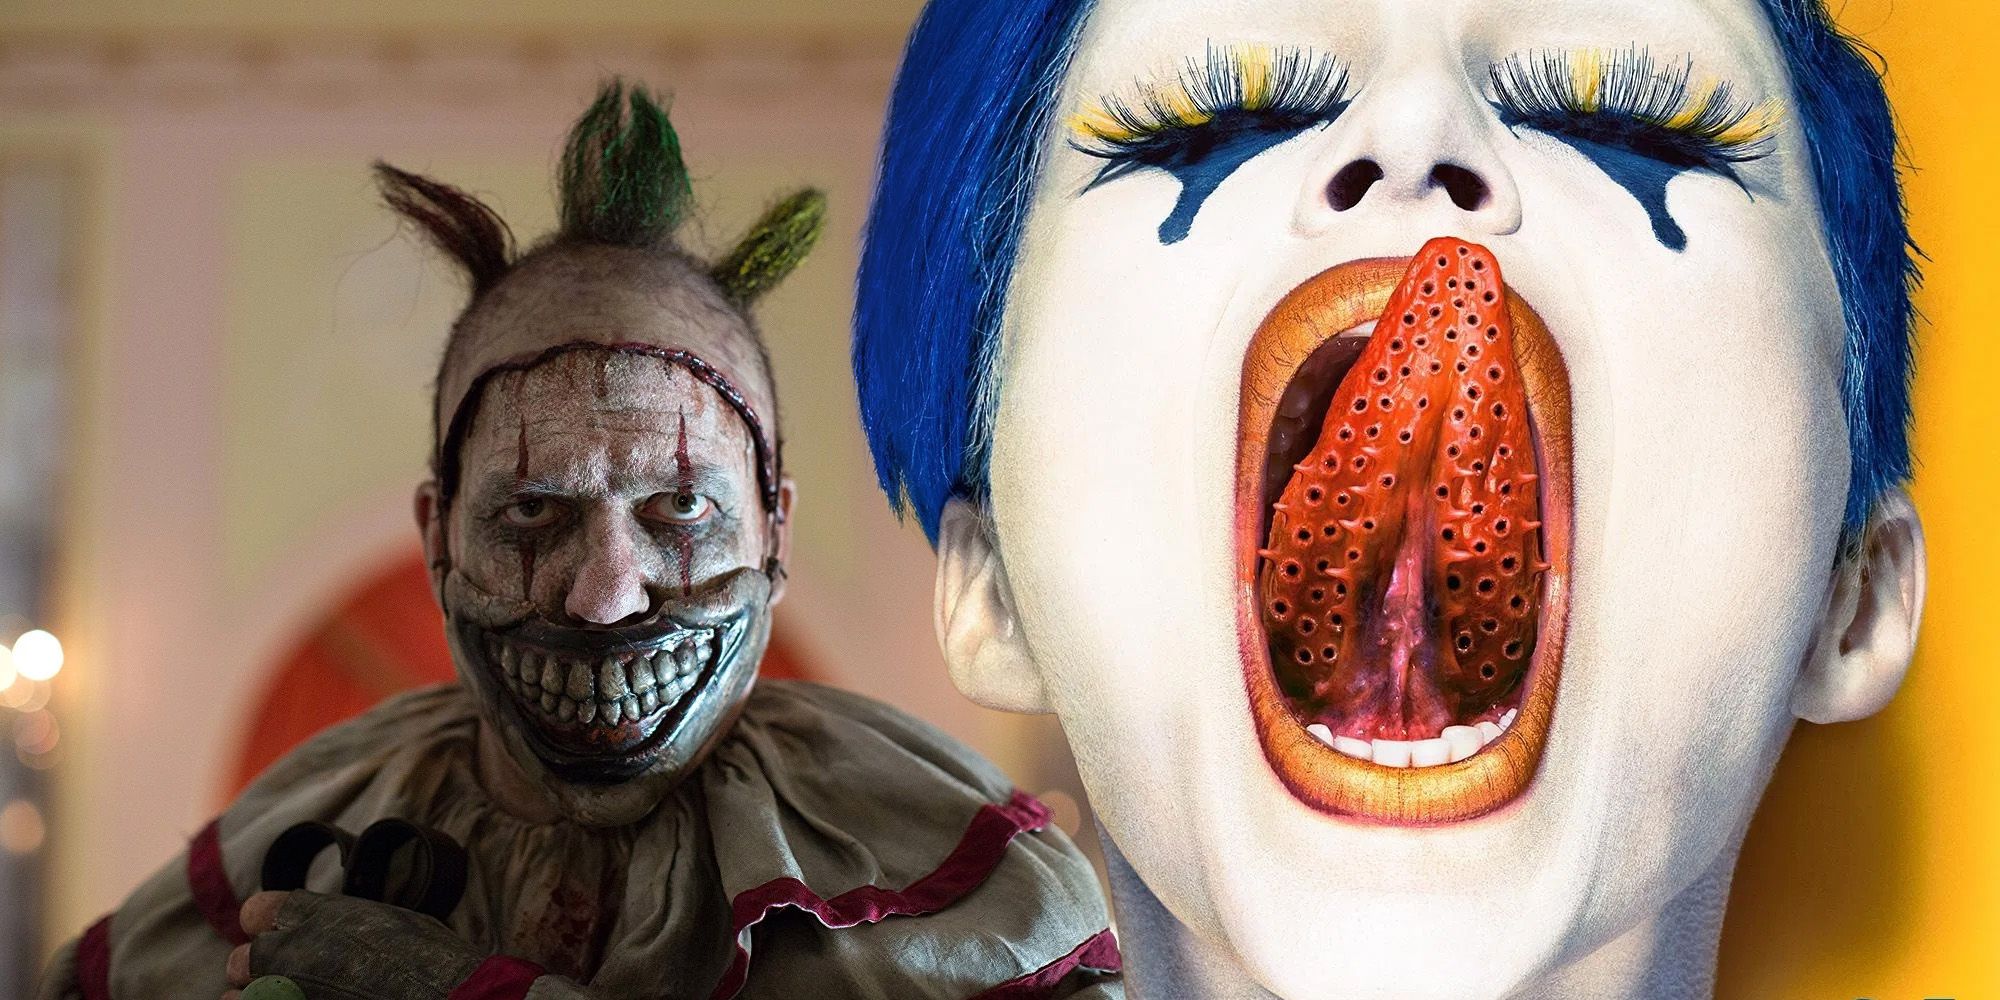 American Horror Story How Cult Failed Twisty The Clown’s Anticipated.